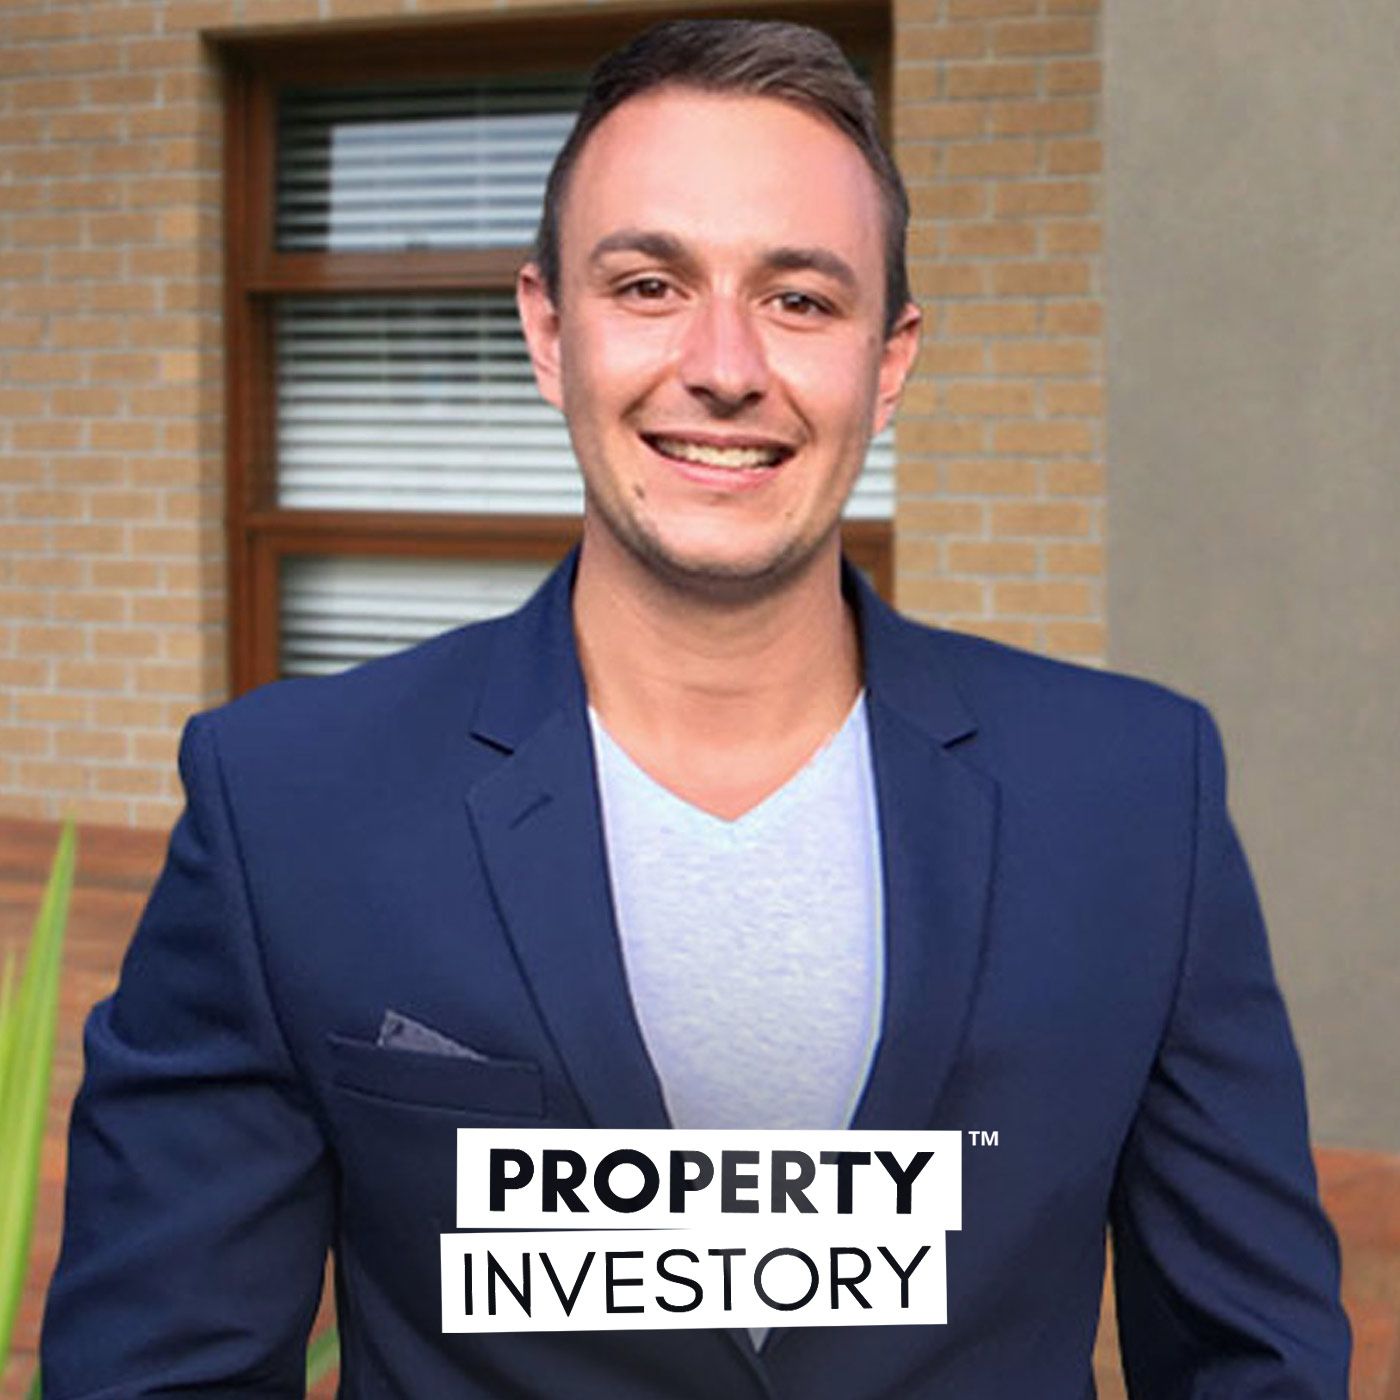 Guide for Real Estate Buyers in Building Wealth With Daniel Walsh